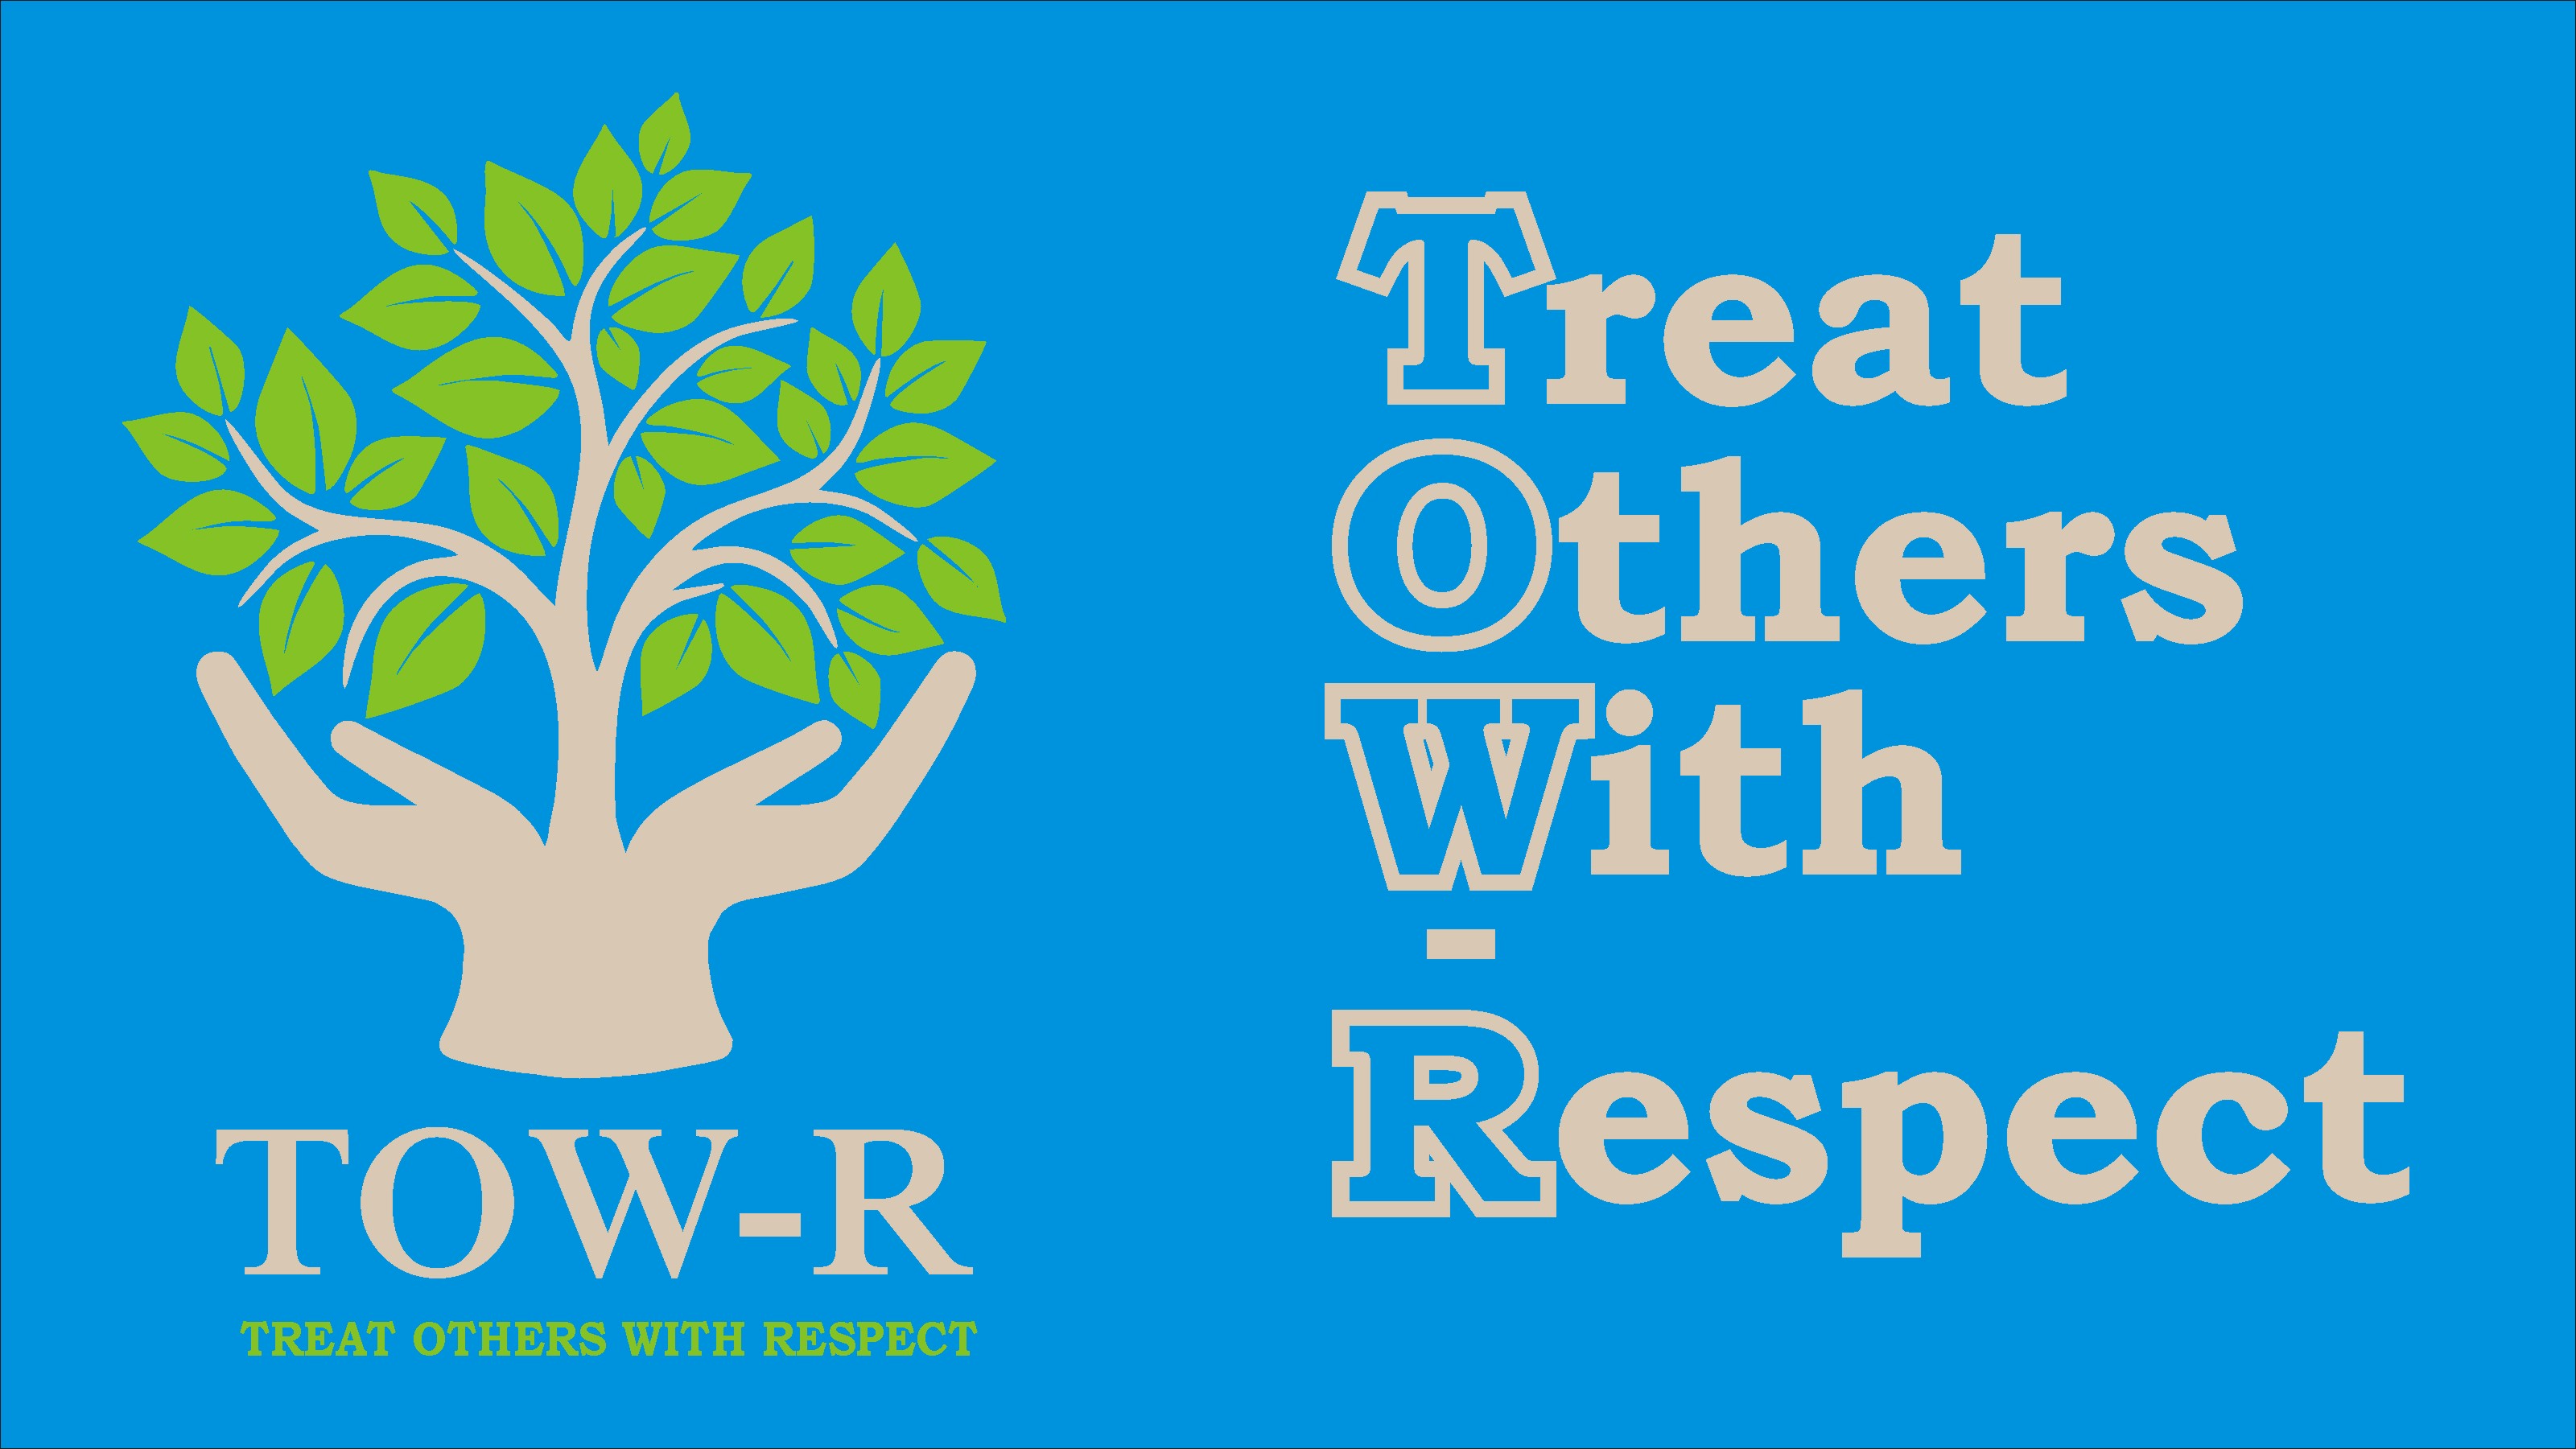 Treat Others With Respect logo